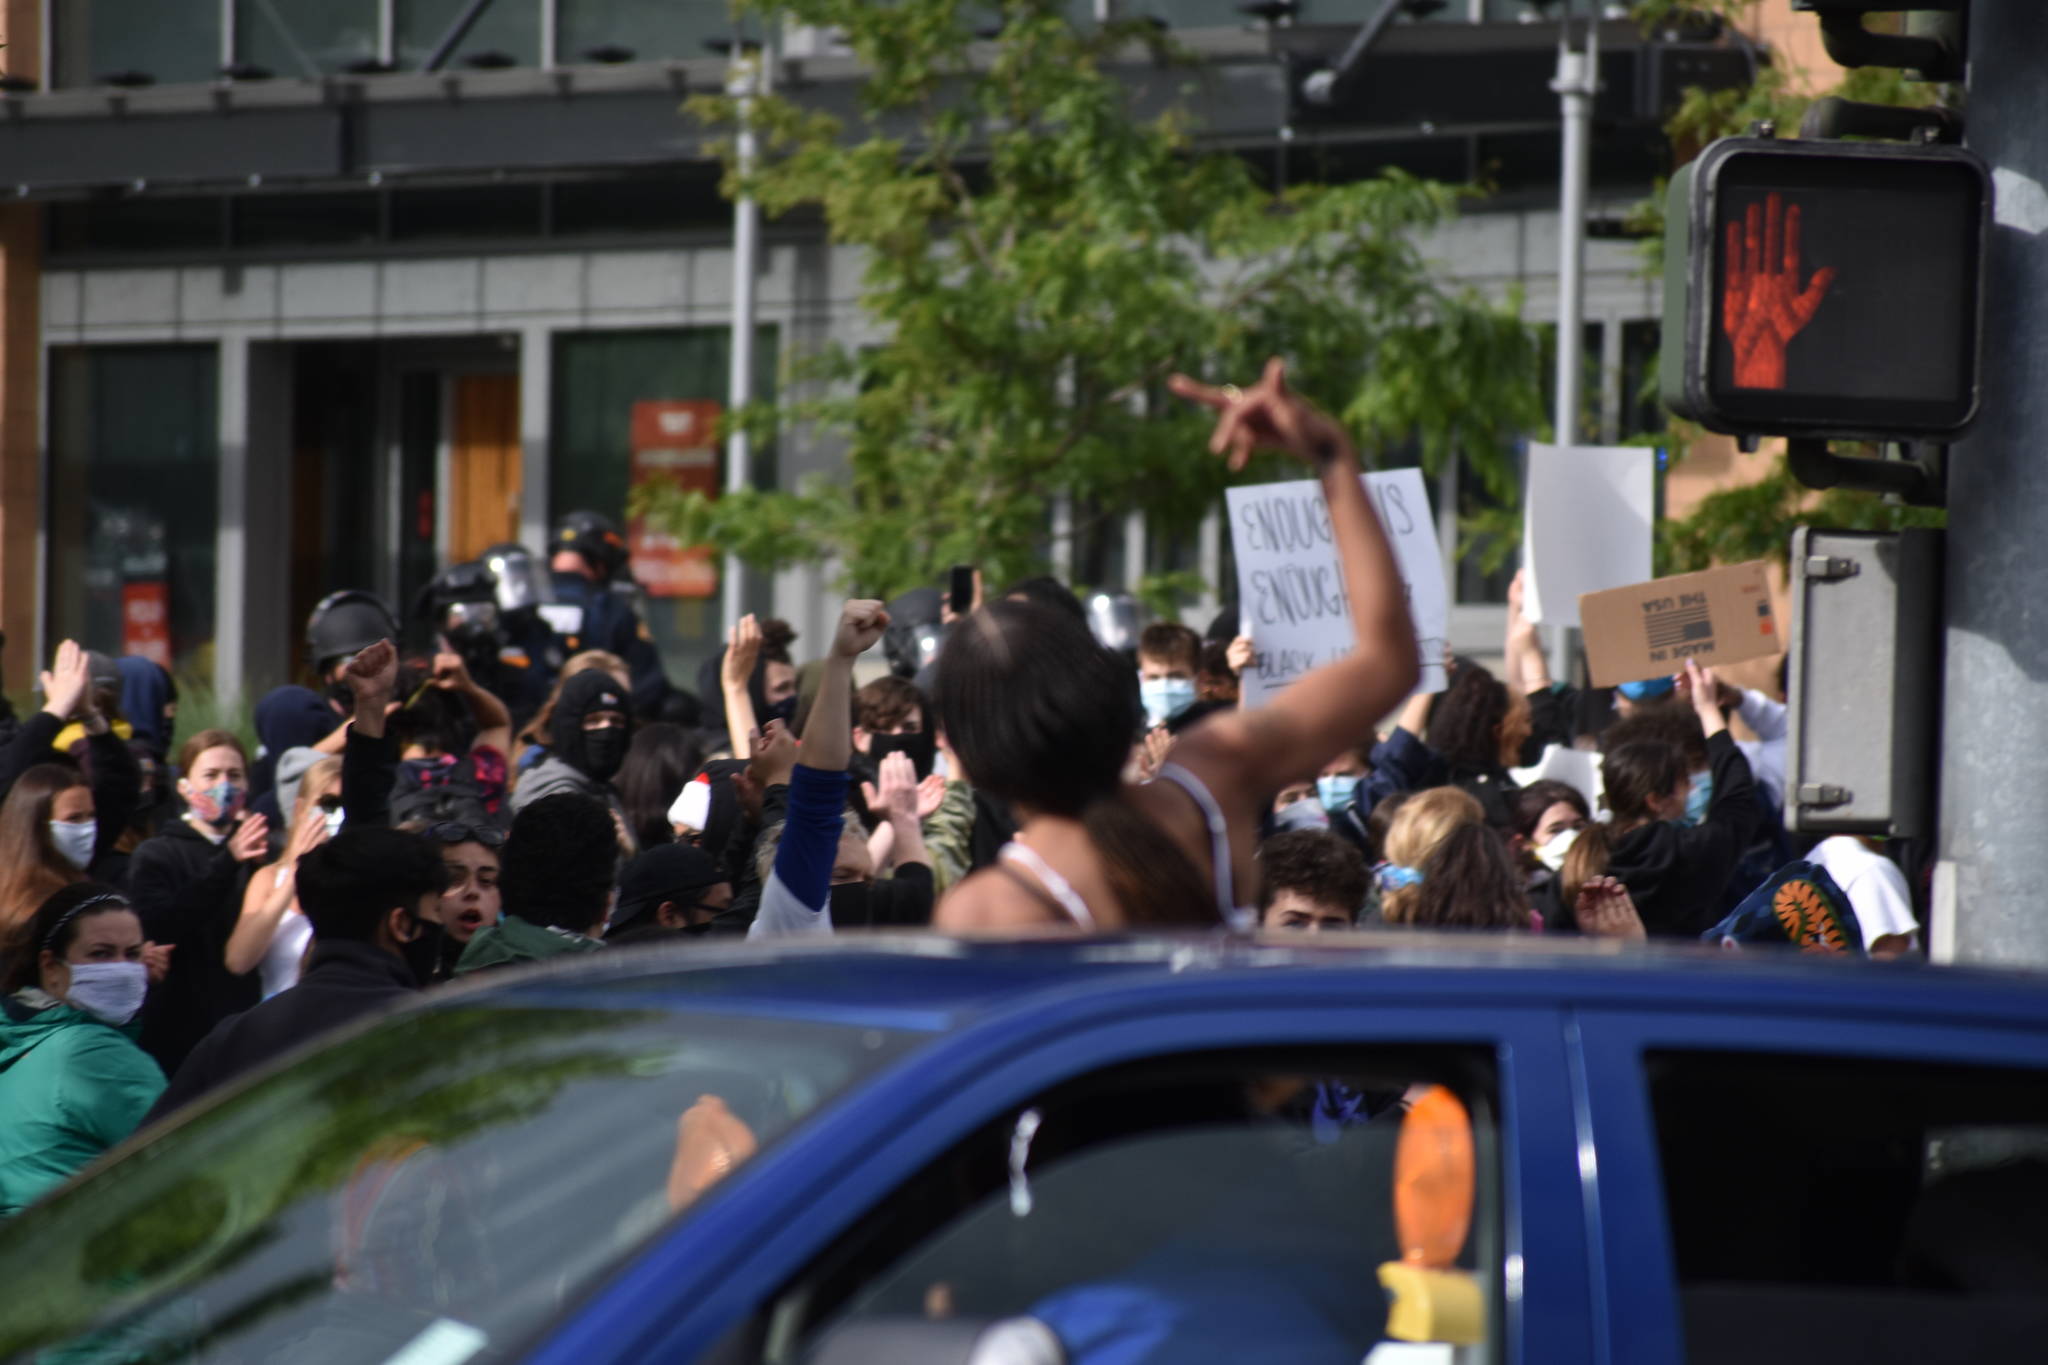 A woman cheers on Bellevue protesters from her car as it drives by, Sunday, May 31. Photo by Haley Ausbun.